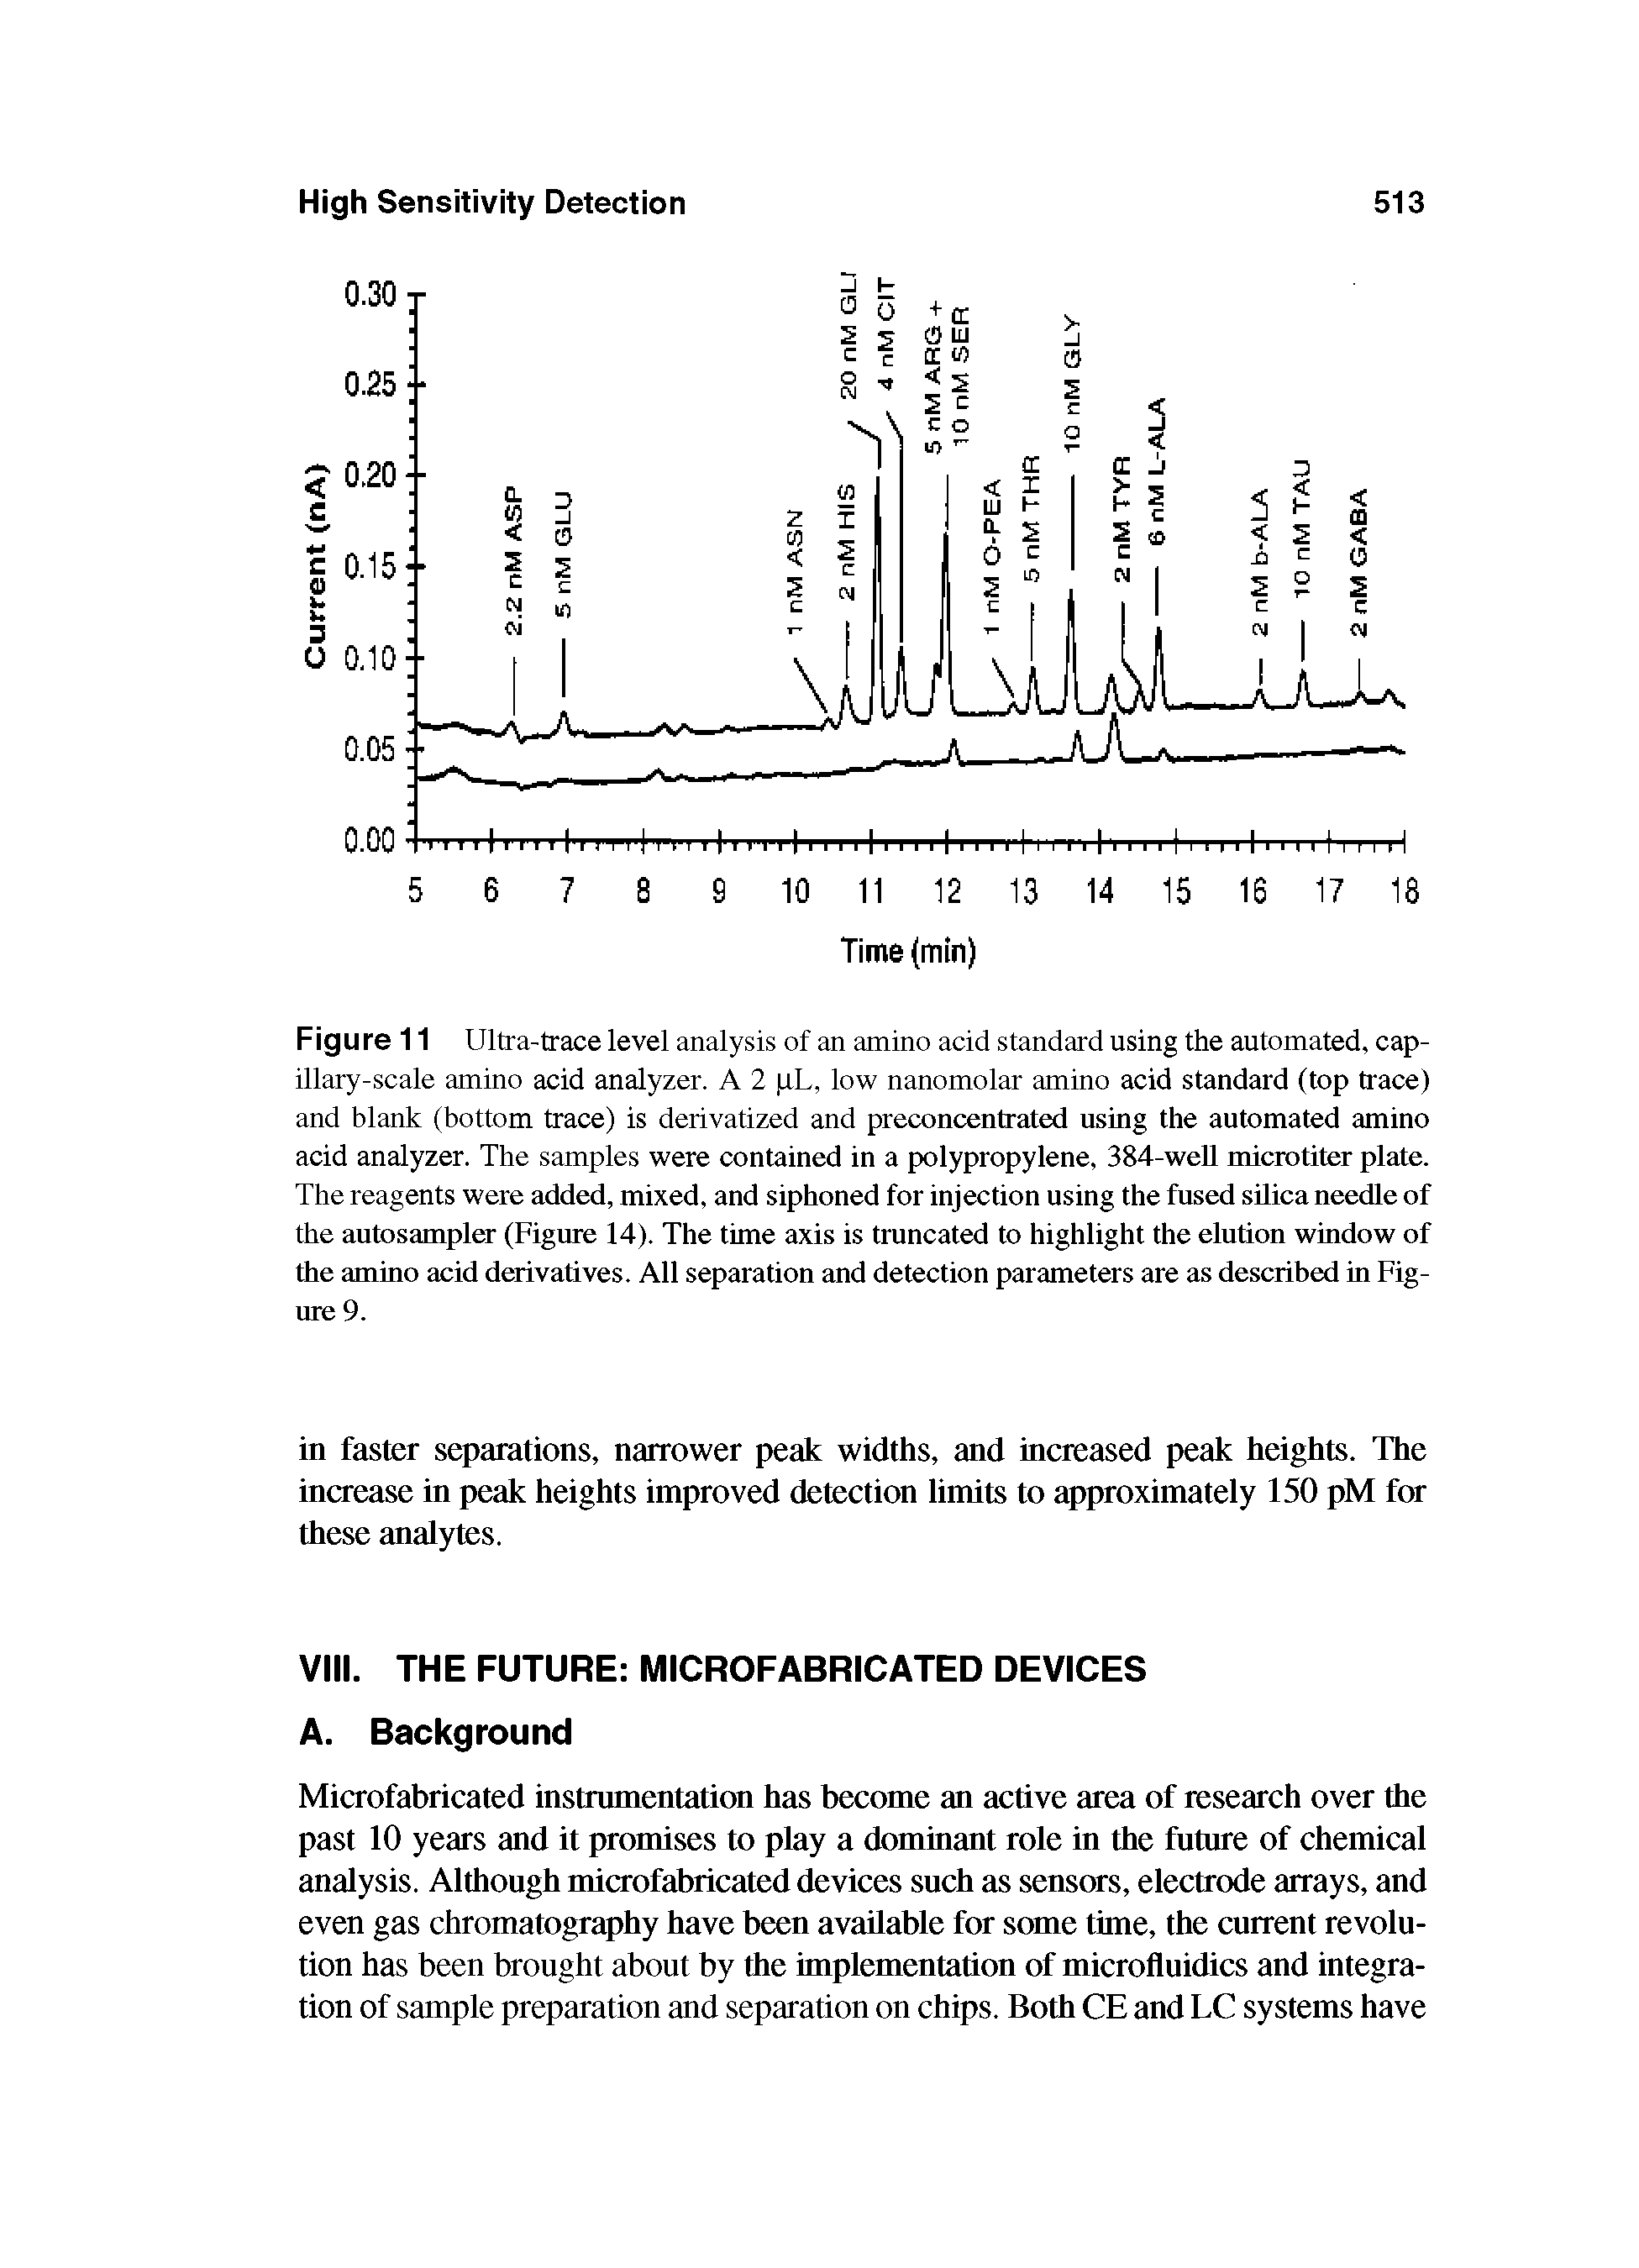 Figure 11 Ultra-trace level analysis of an amino acid standard using the automated, capillary-scale amino acid analyzer. A 2 pL, low nanomolar amino acid standard (top trace) and blank (bottom trace) is derivatized and preconcentrated using the automated amino acid analyzer. The samples were contained in a polypropylene, 384-weU microtiter plate. The reagents were added, mixed, and siphoned for injection using the fused silica needle of the autosampler (Figure 14). The time axis is truncated to highlight the elution window of the amino acid derivatives. All separation and detection parameters are as described in Figure 9.